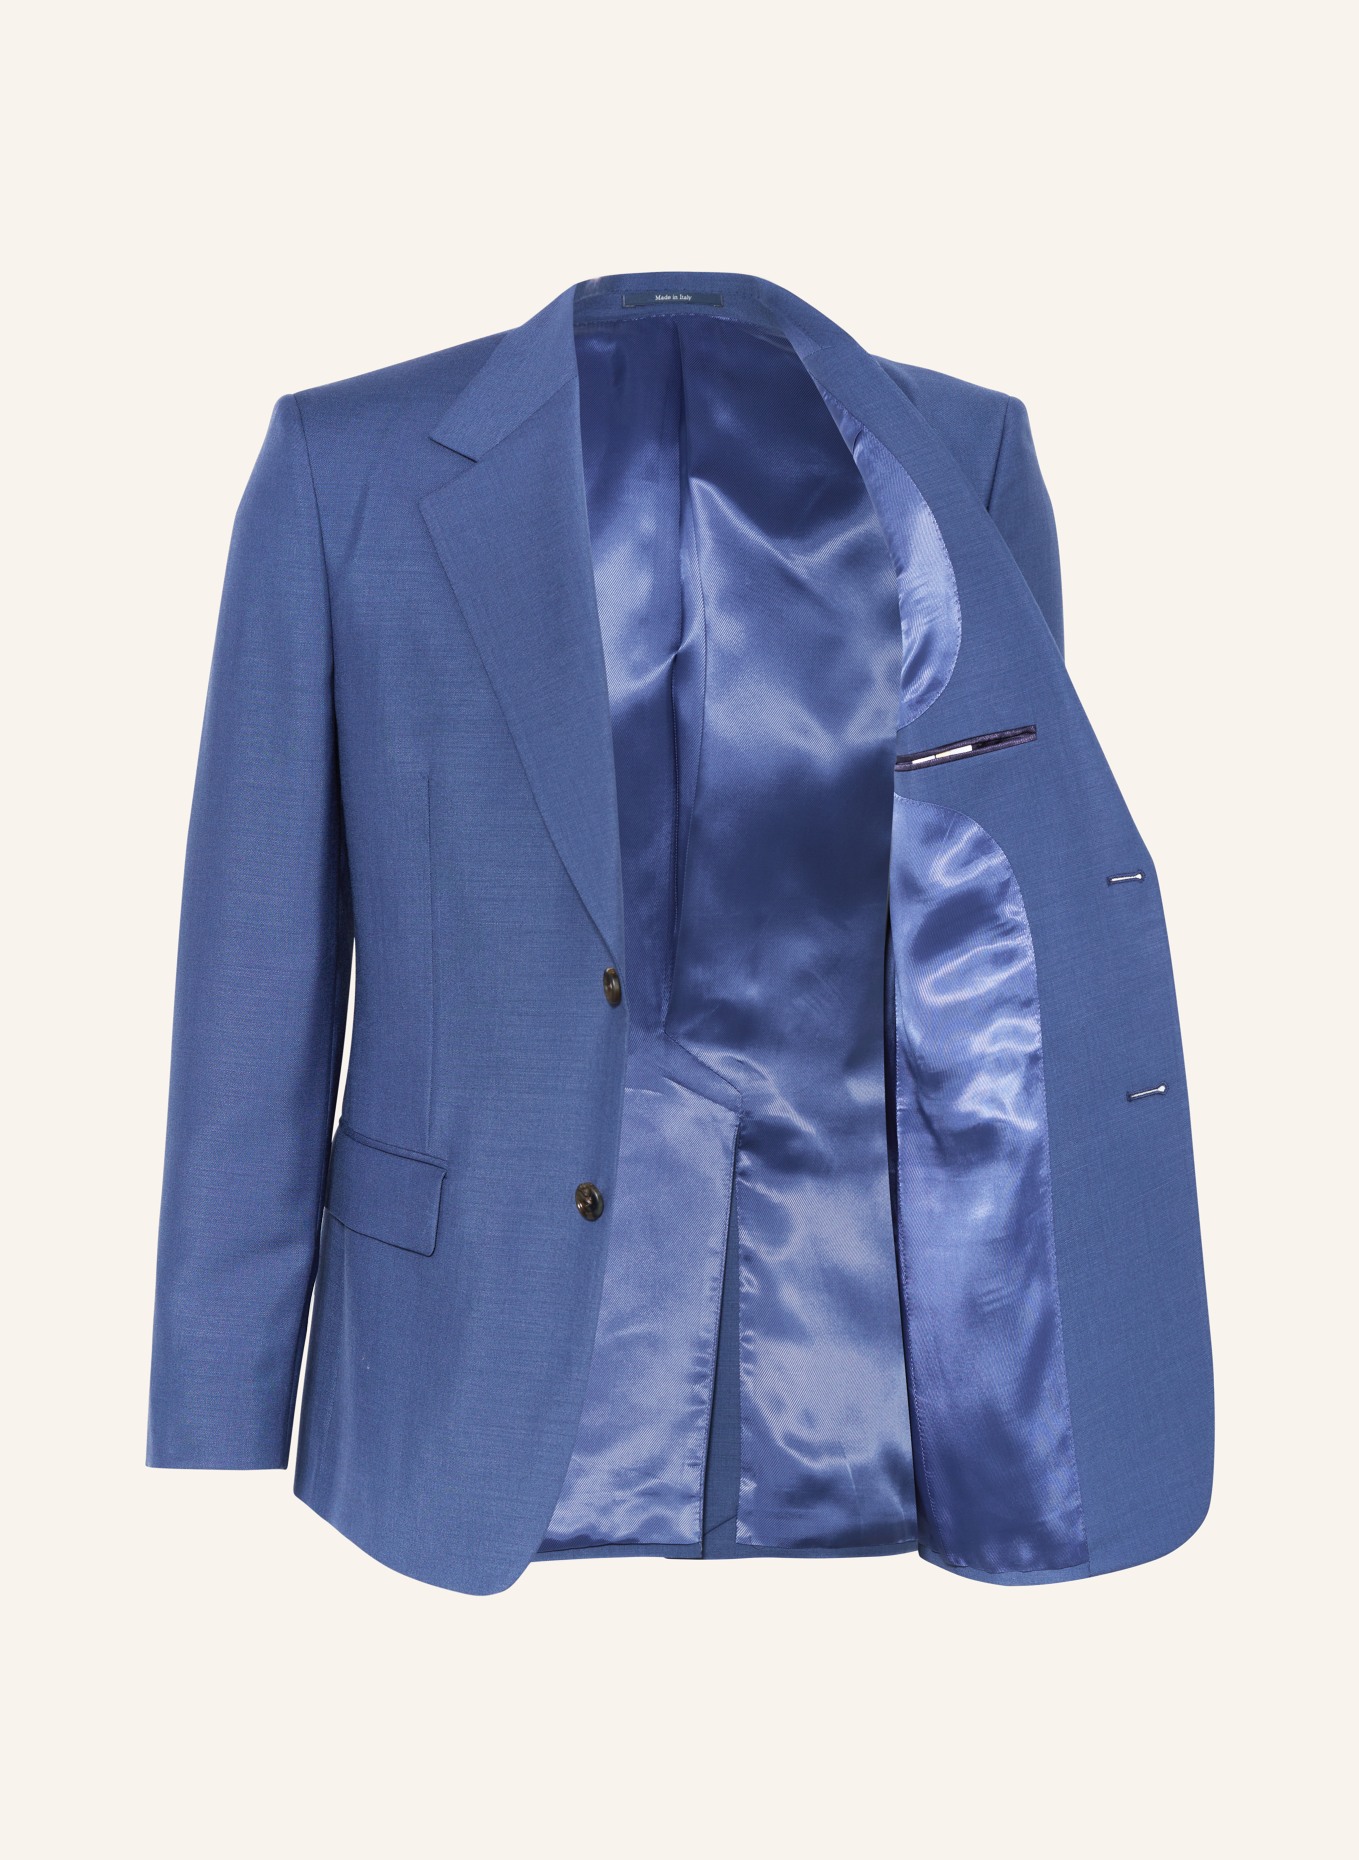 GUCCI Suit jacket extra slim fit, Color: 4719 STORMY SEA (LIGHT BLUE) (Image 4)